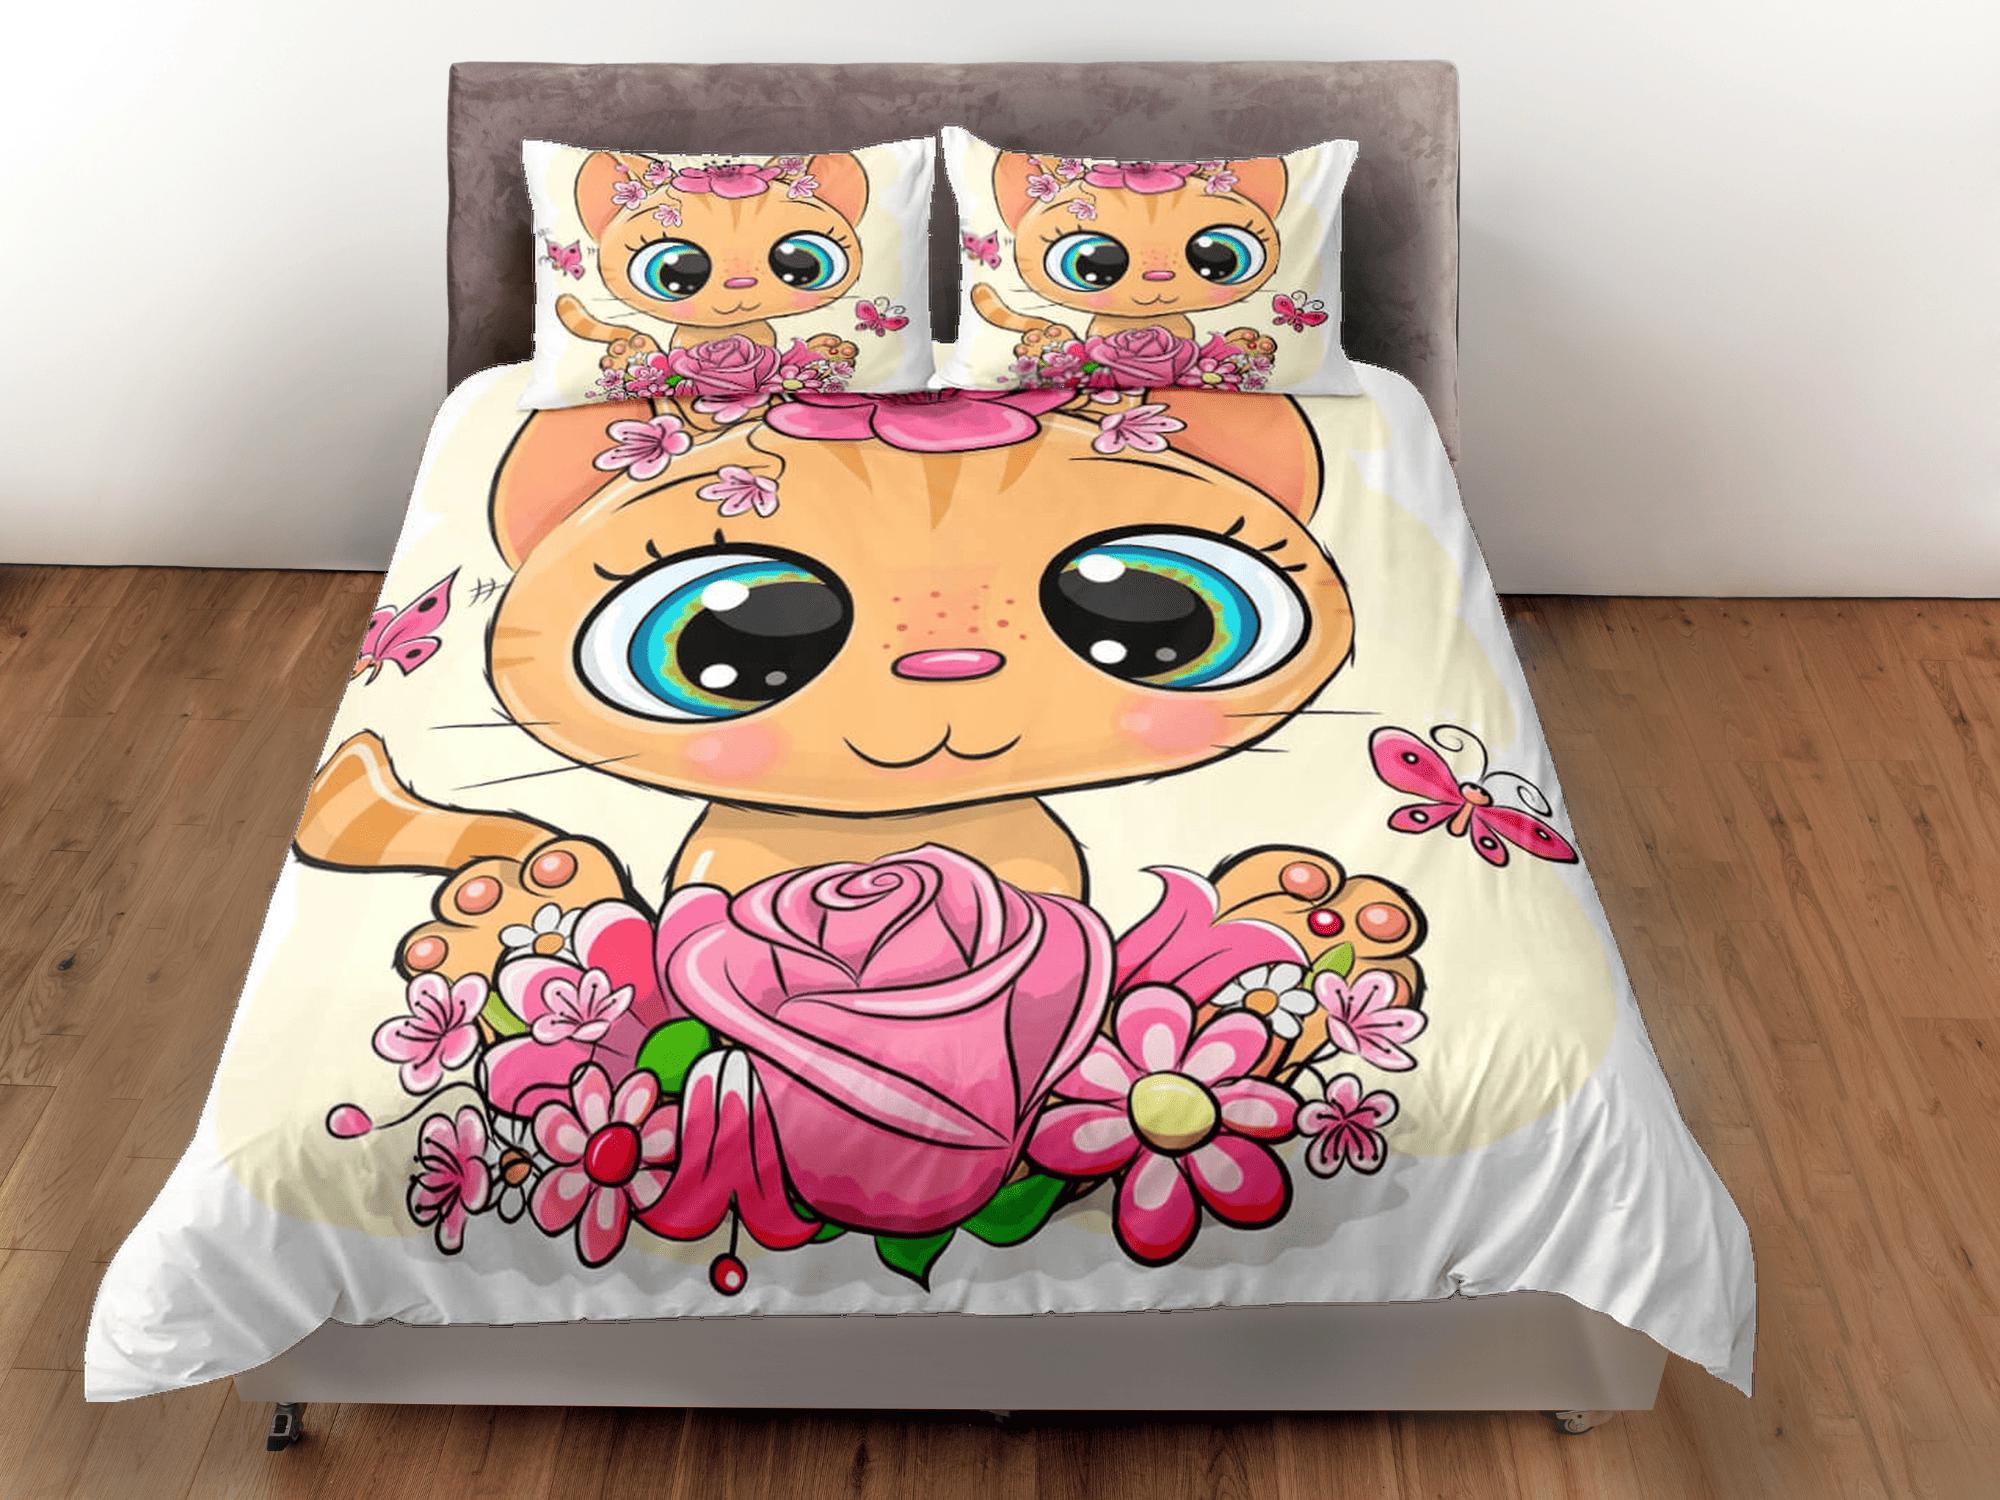 daintyduvet Cute Floral Big Eyed Cat Bedding, Girly Toddler Bedding, Kids Duvet Cover Set, Baby Bedding, Baby Shower Doona Cover up to California King